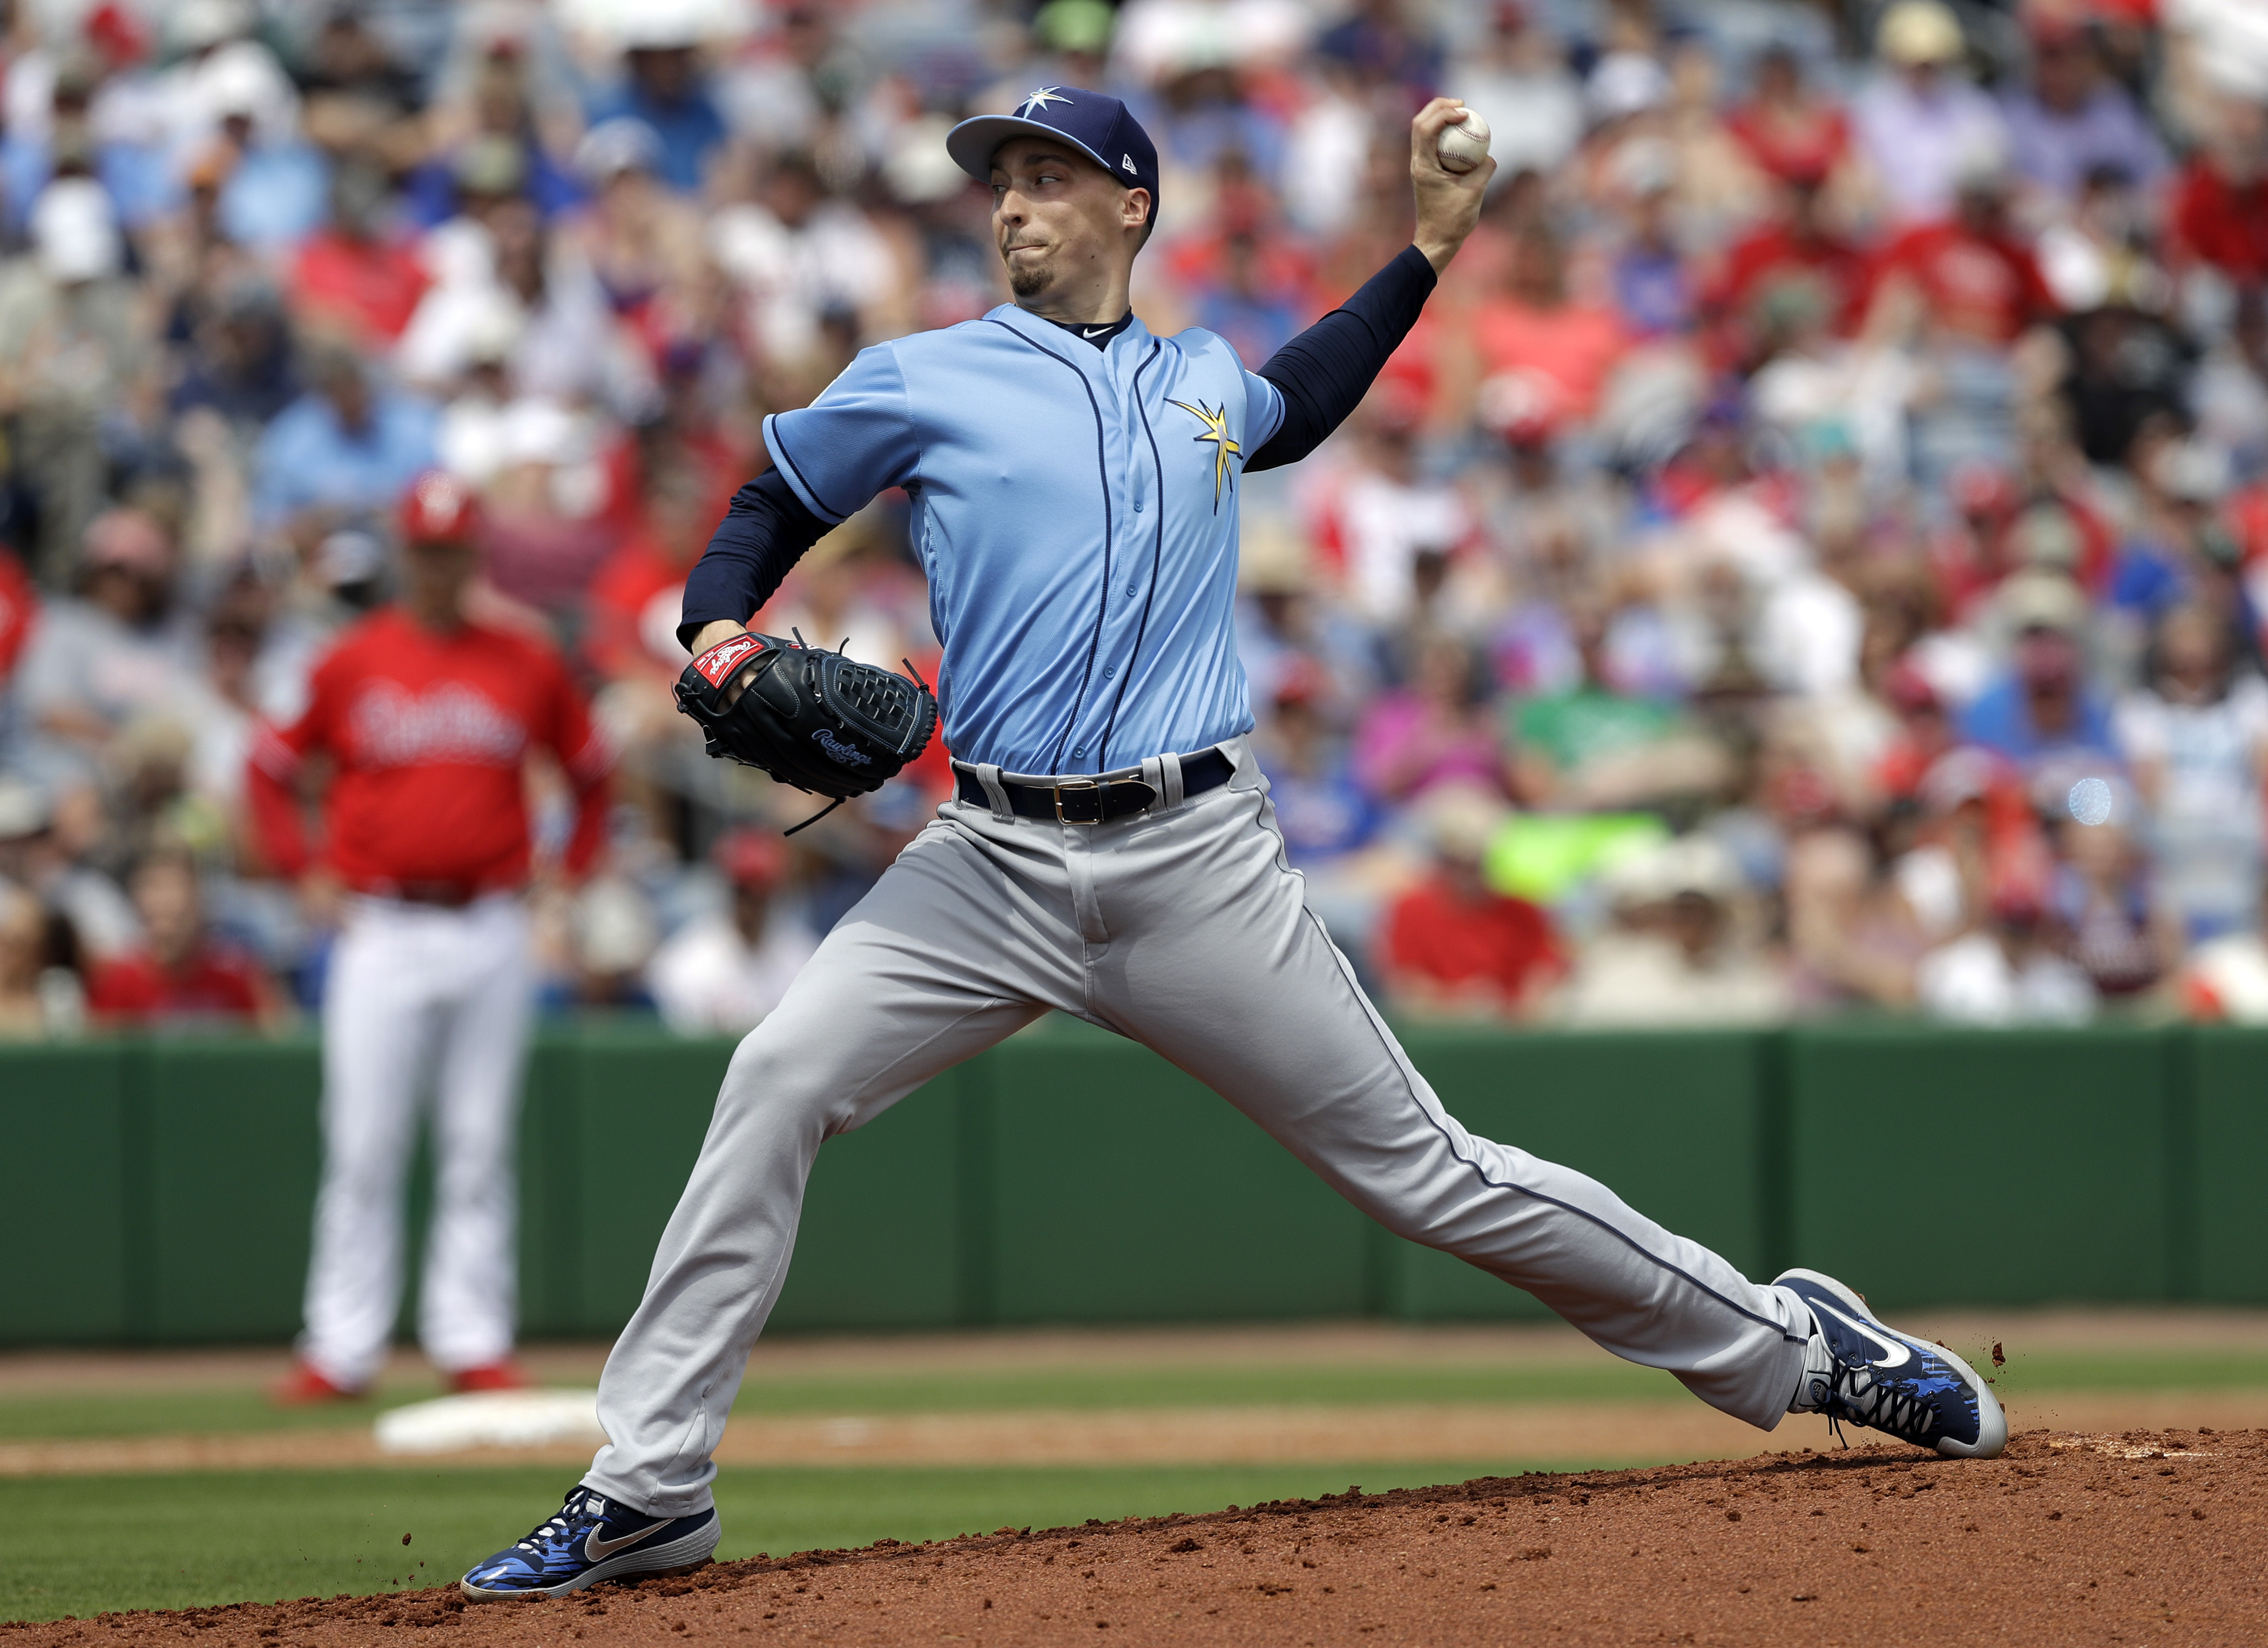 Rays’ Blake Snell focused on pitching, not contract